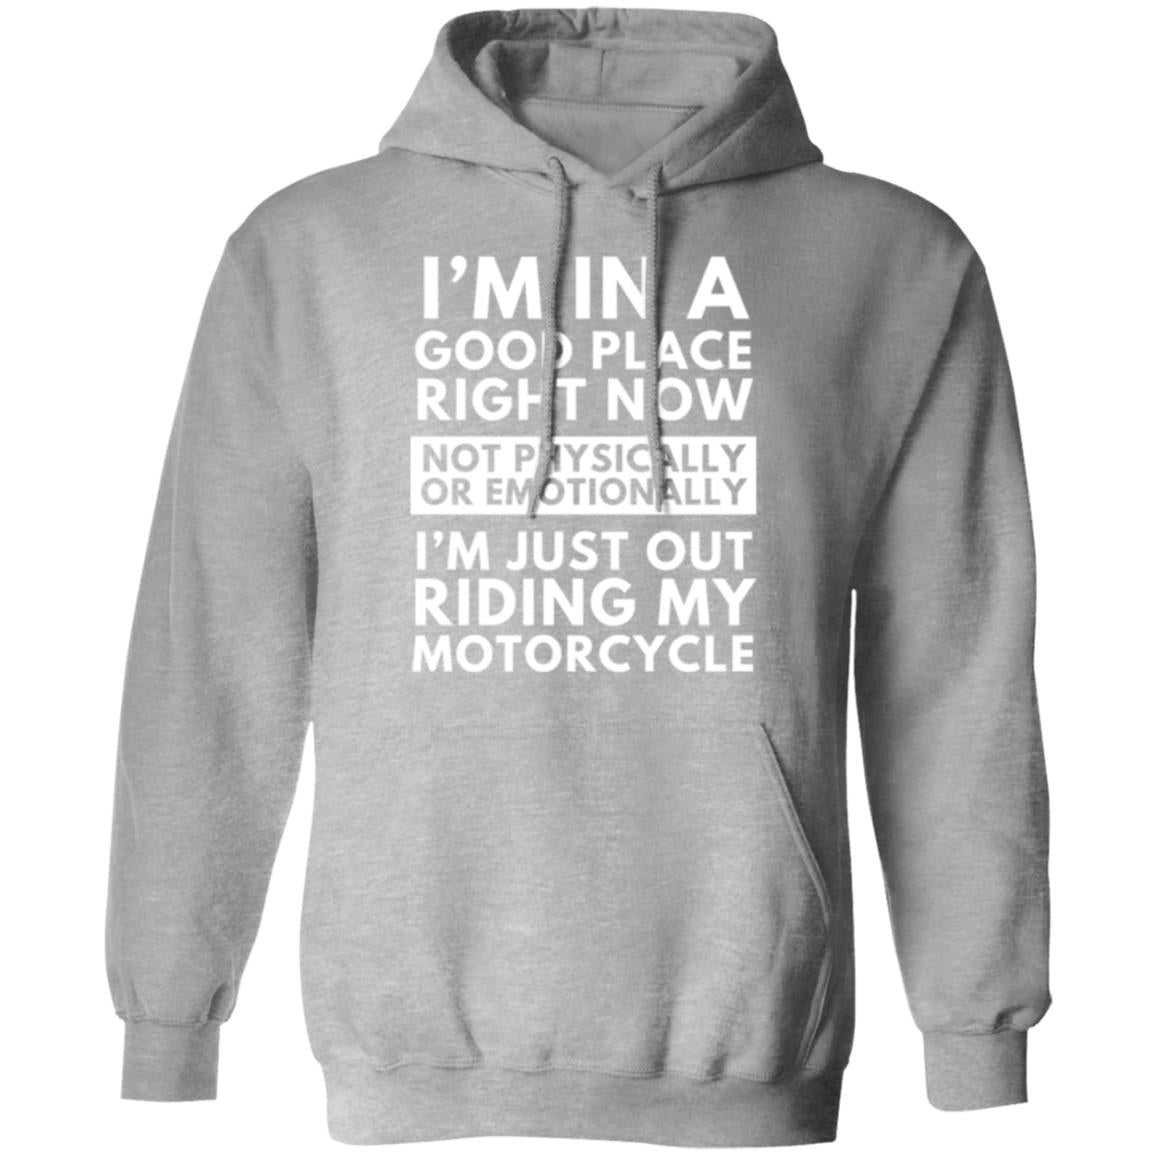 I'm in a Good Place right now, Motorcycle - Pullover Hoodie